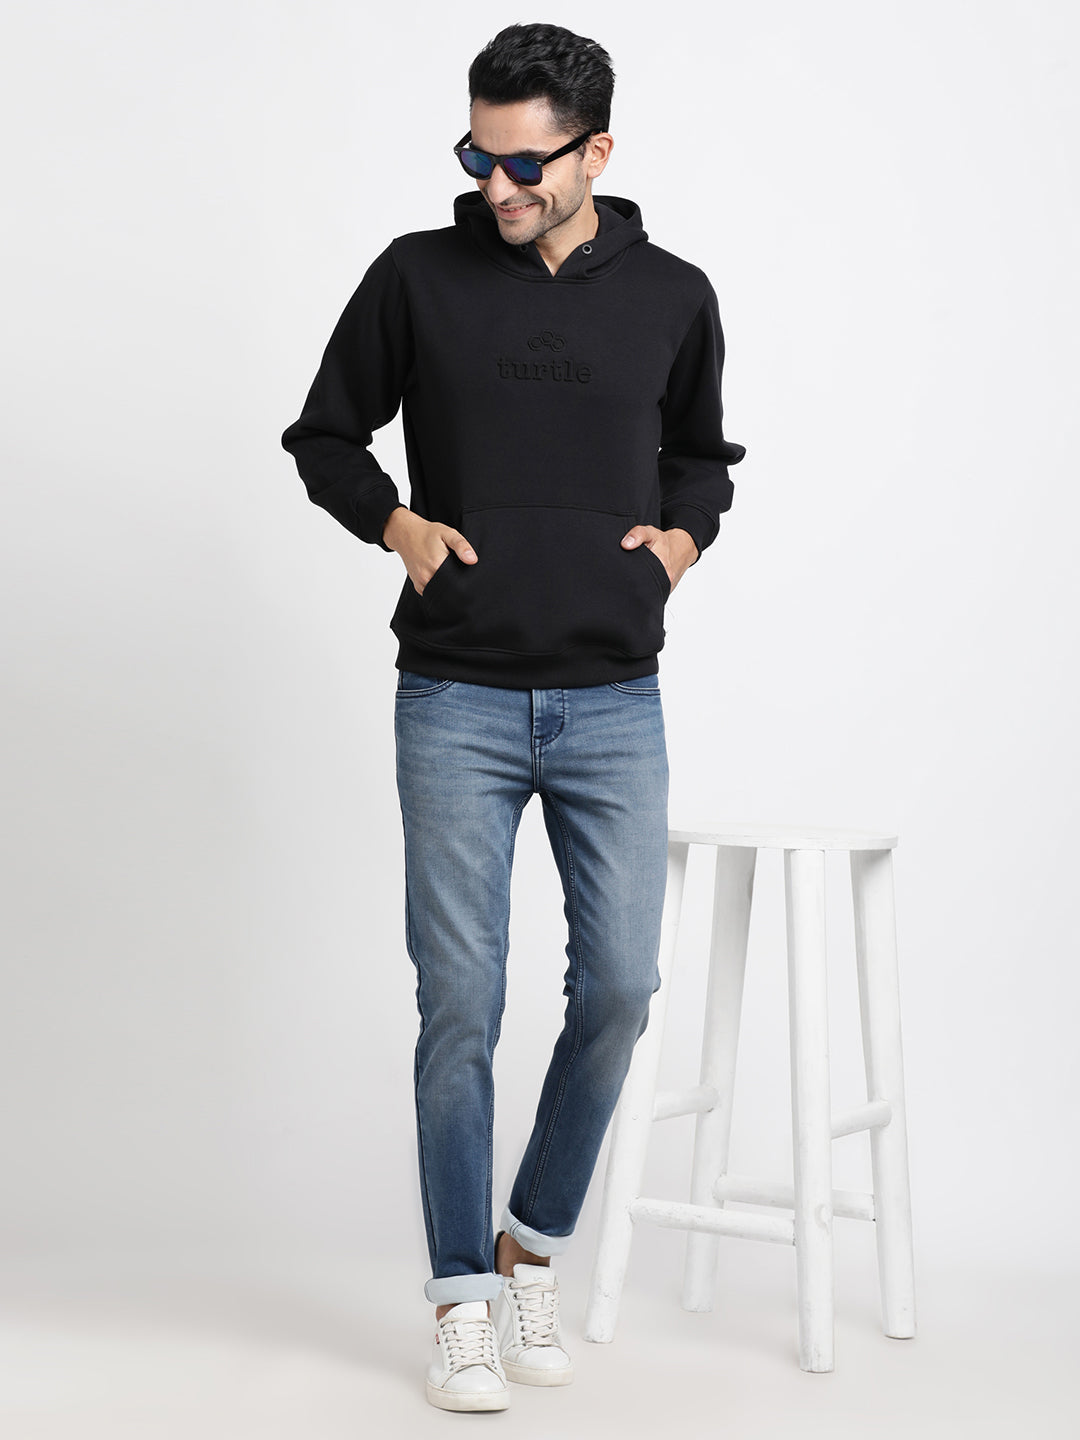 Knitted Black Printed Regular Fit Full Sleeve Casual Sweat Shirt